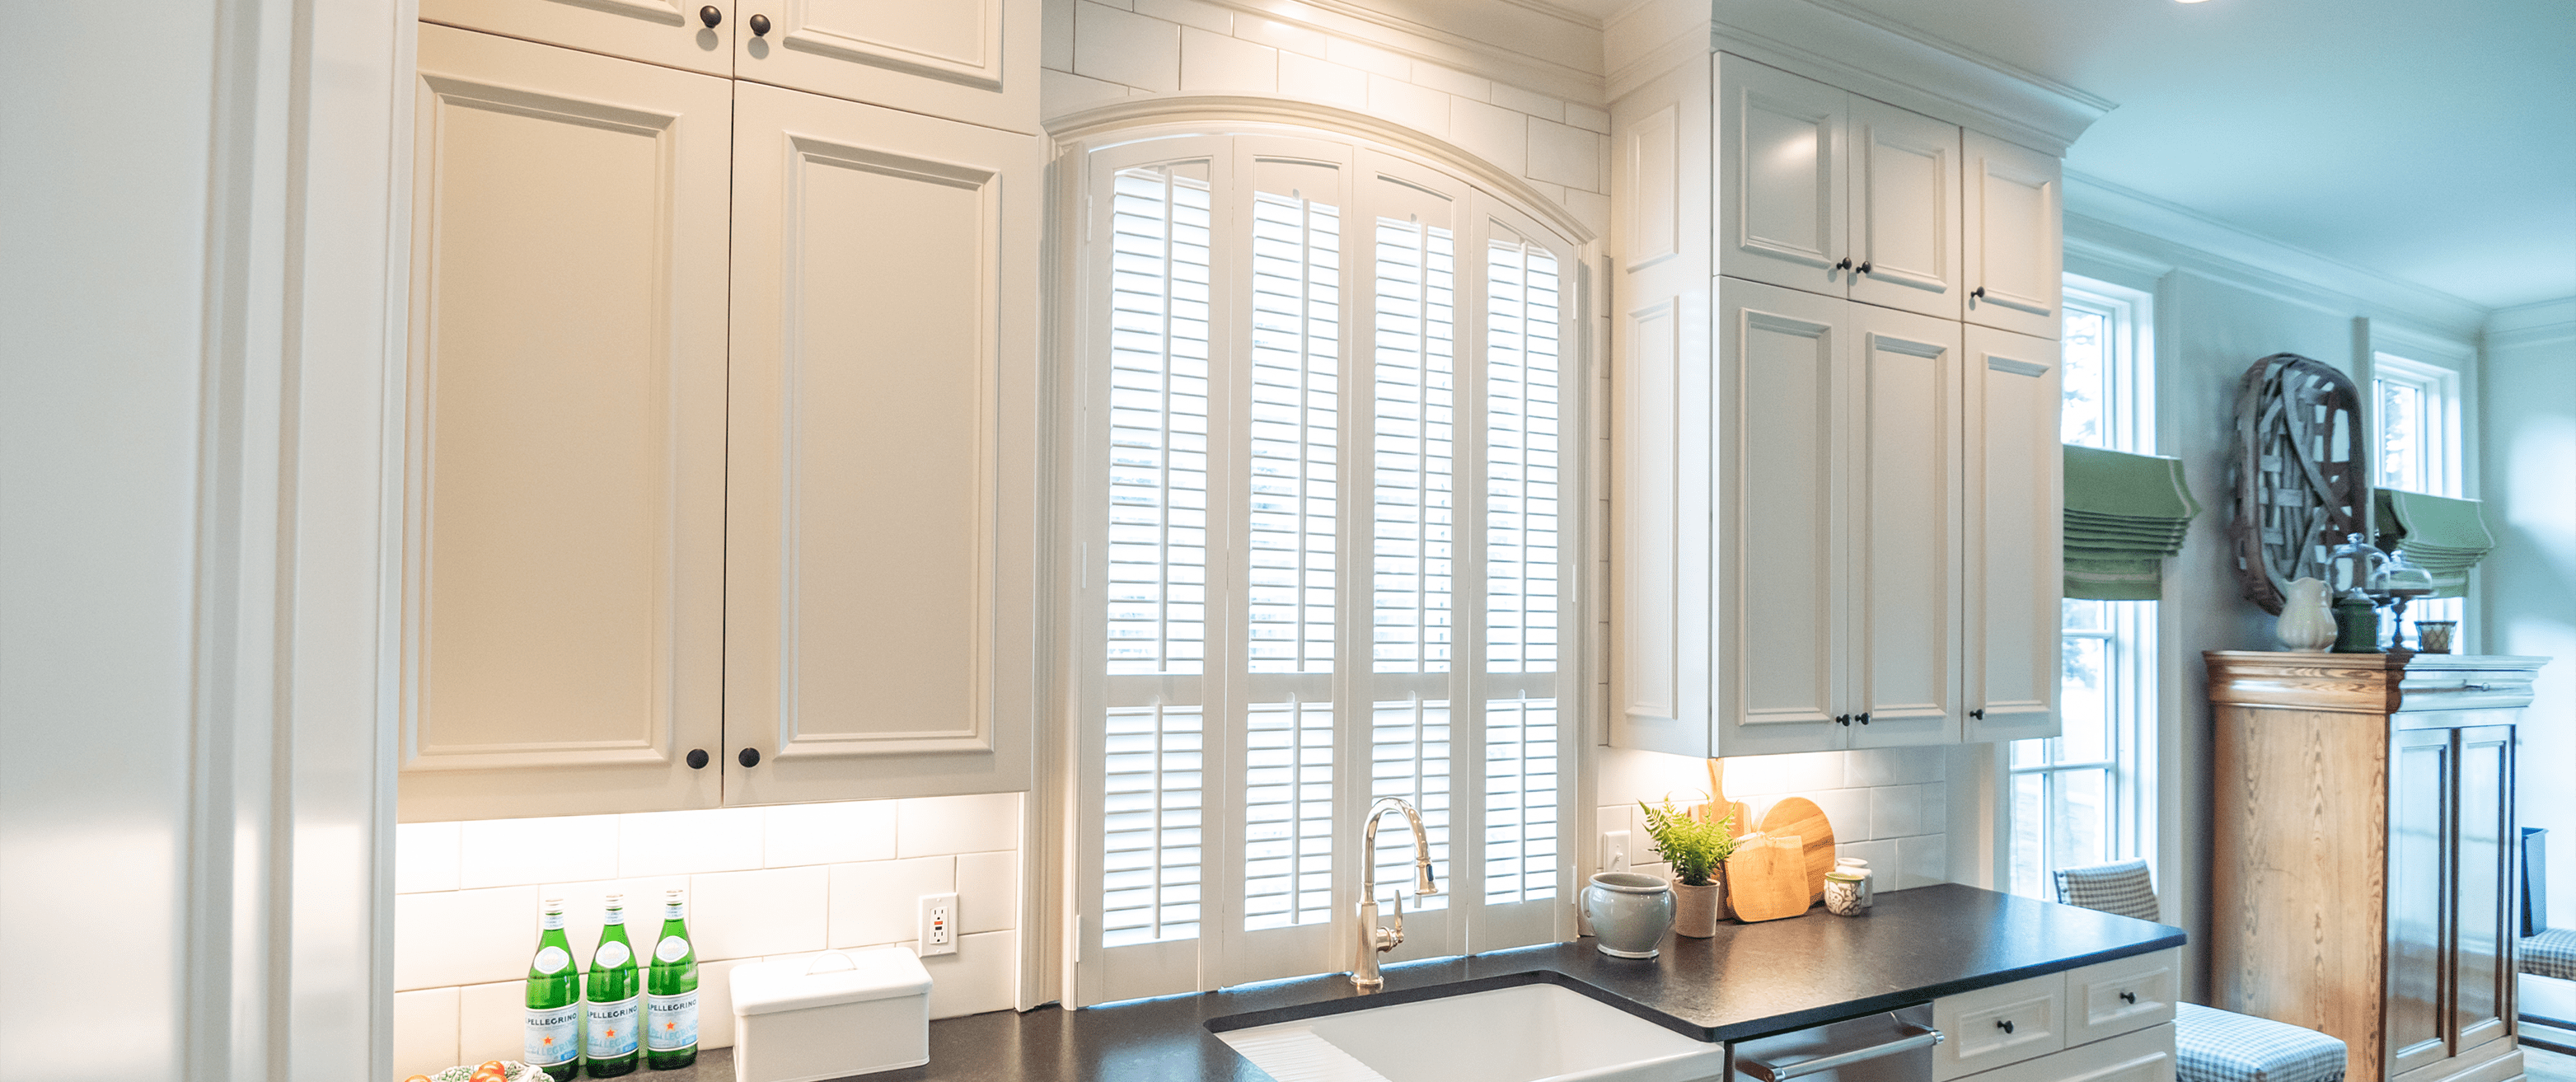 white moveable louvered interior kitchen shutters custom Dwell Shutter and Blinds window treatment